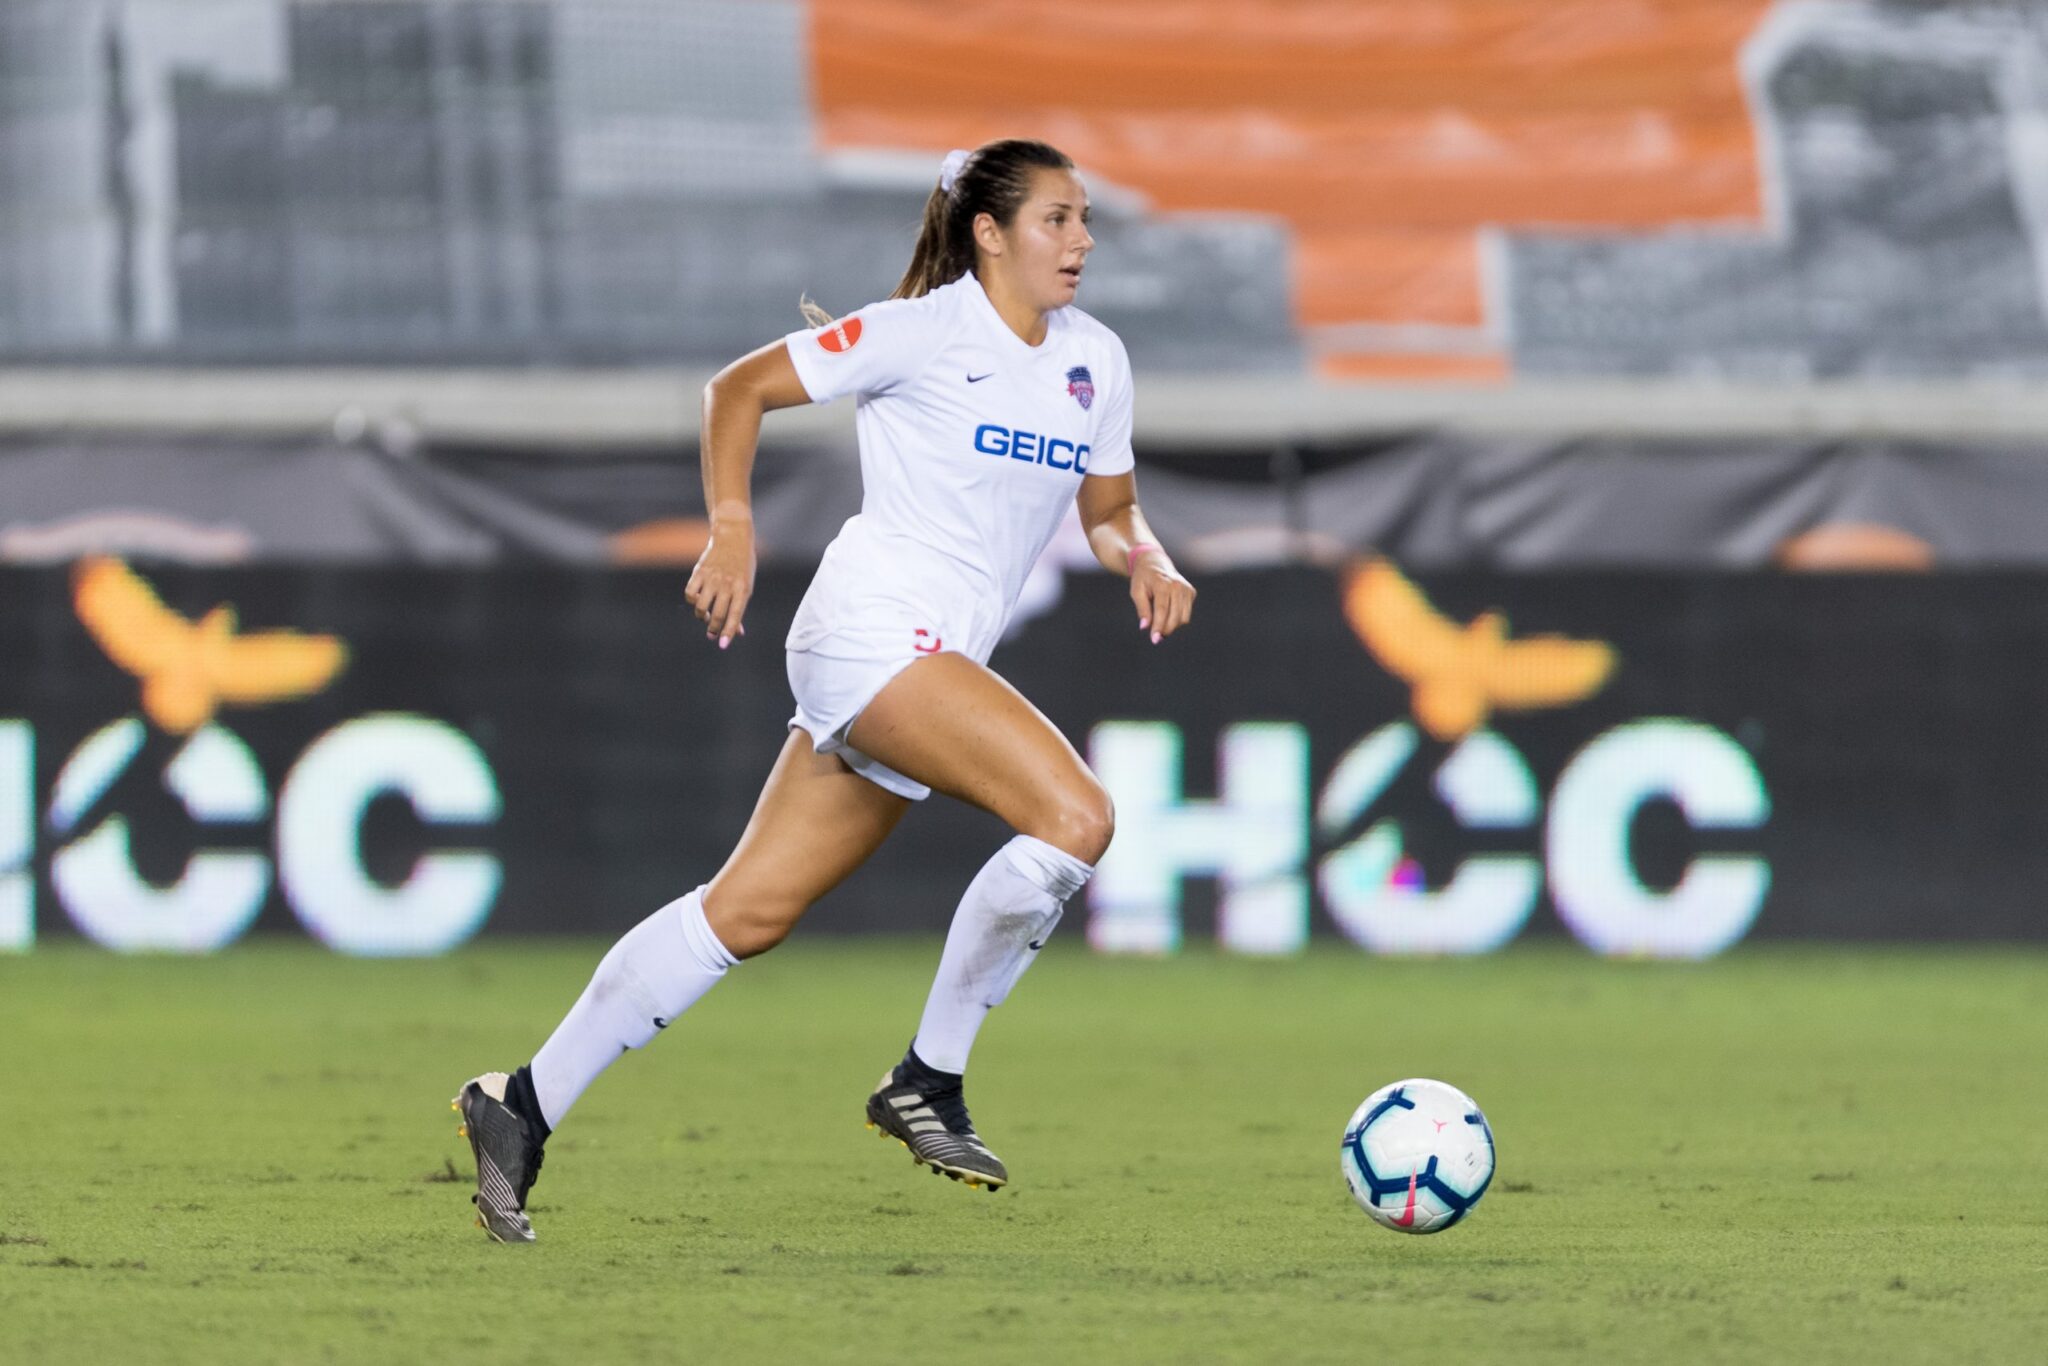 Sam Staab named to W-League Team of the Week Featured Image